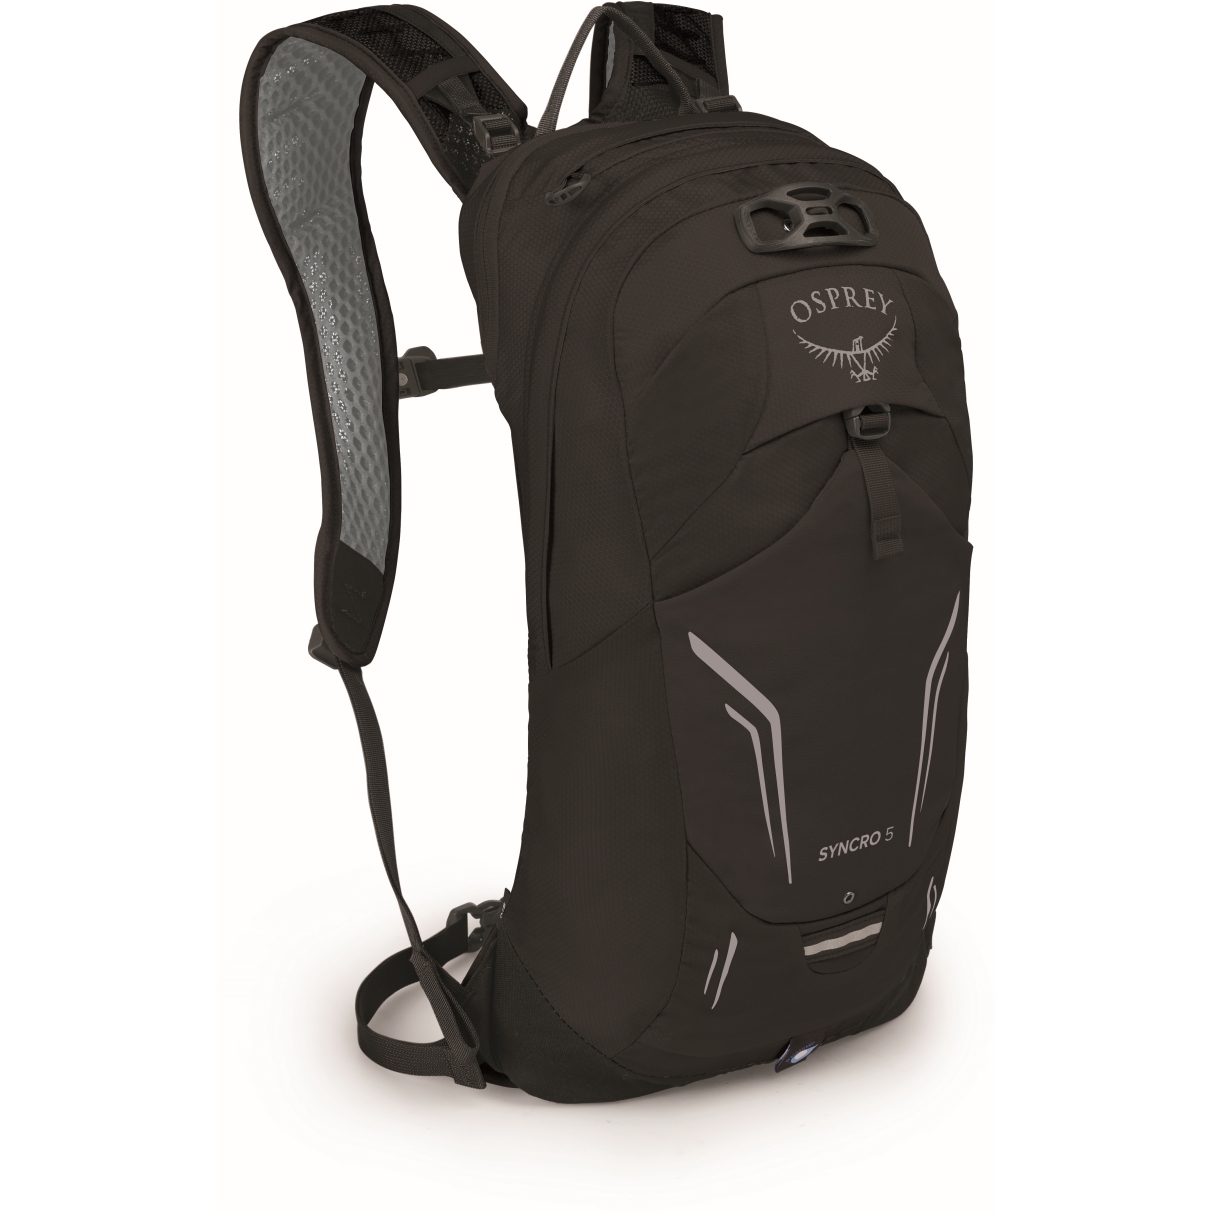 Picture of Osprey Syncro 5 Backpack - Black